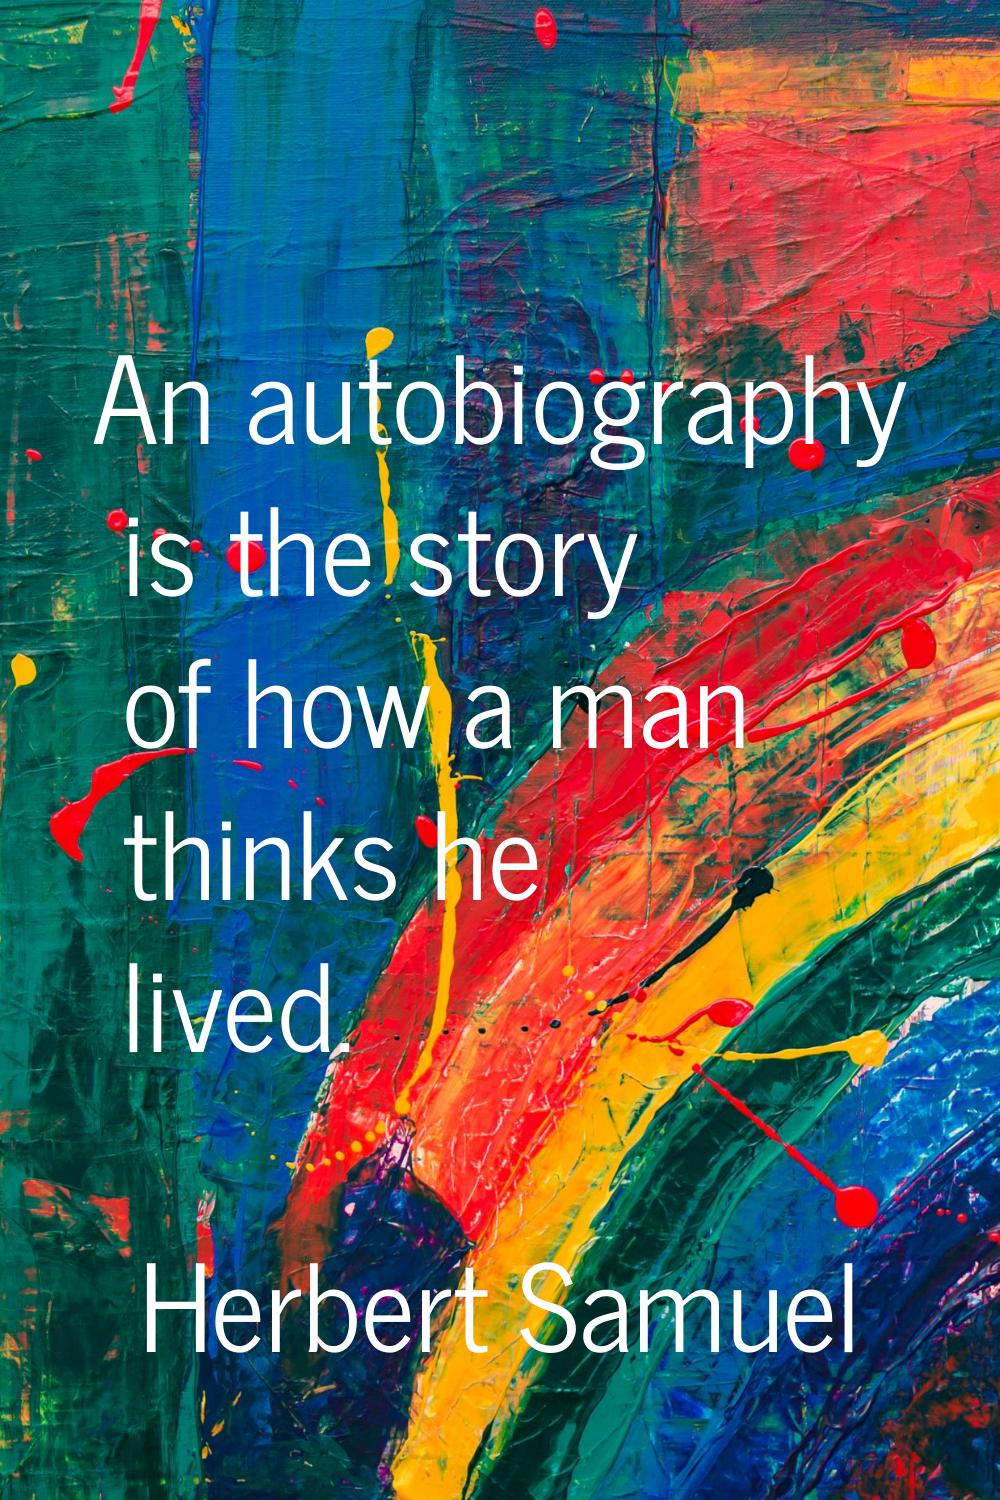 An autobiography is the story of how a man thinks he lived.